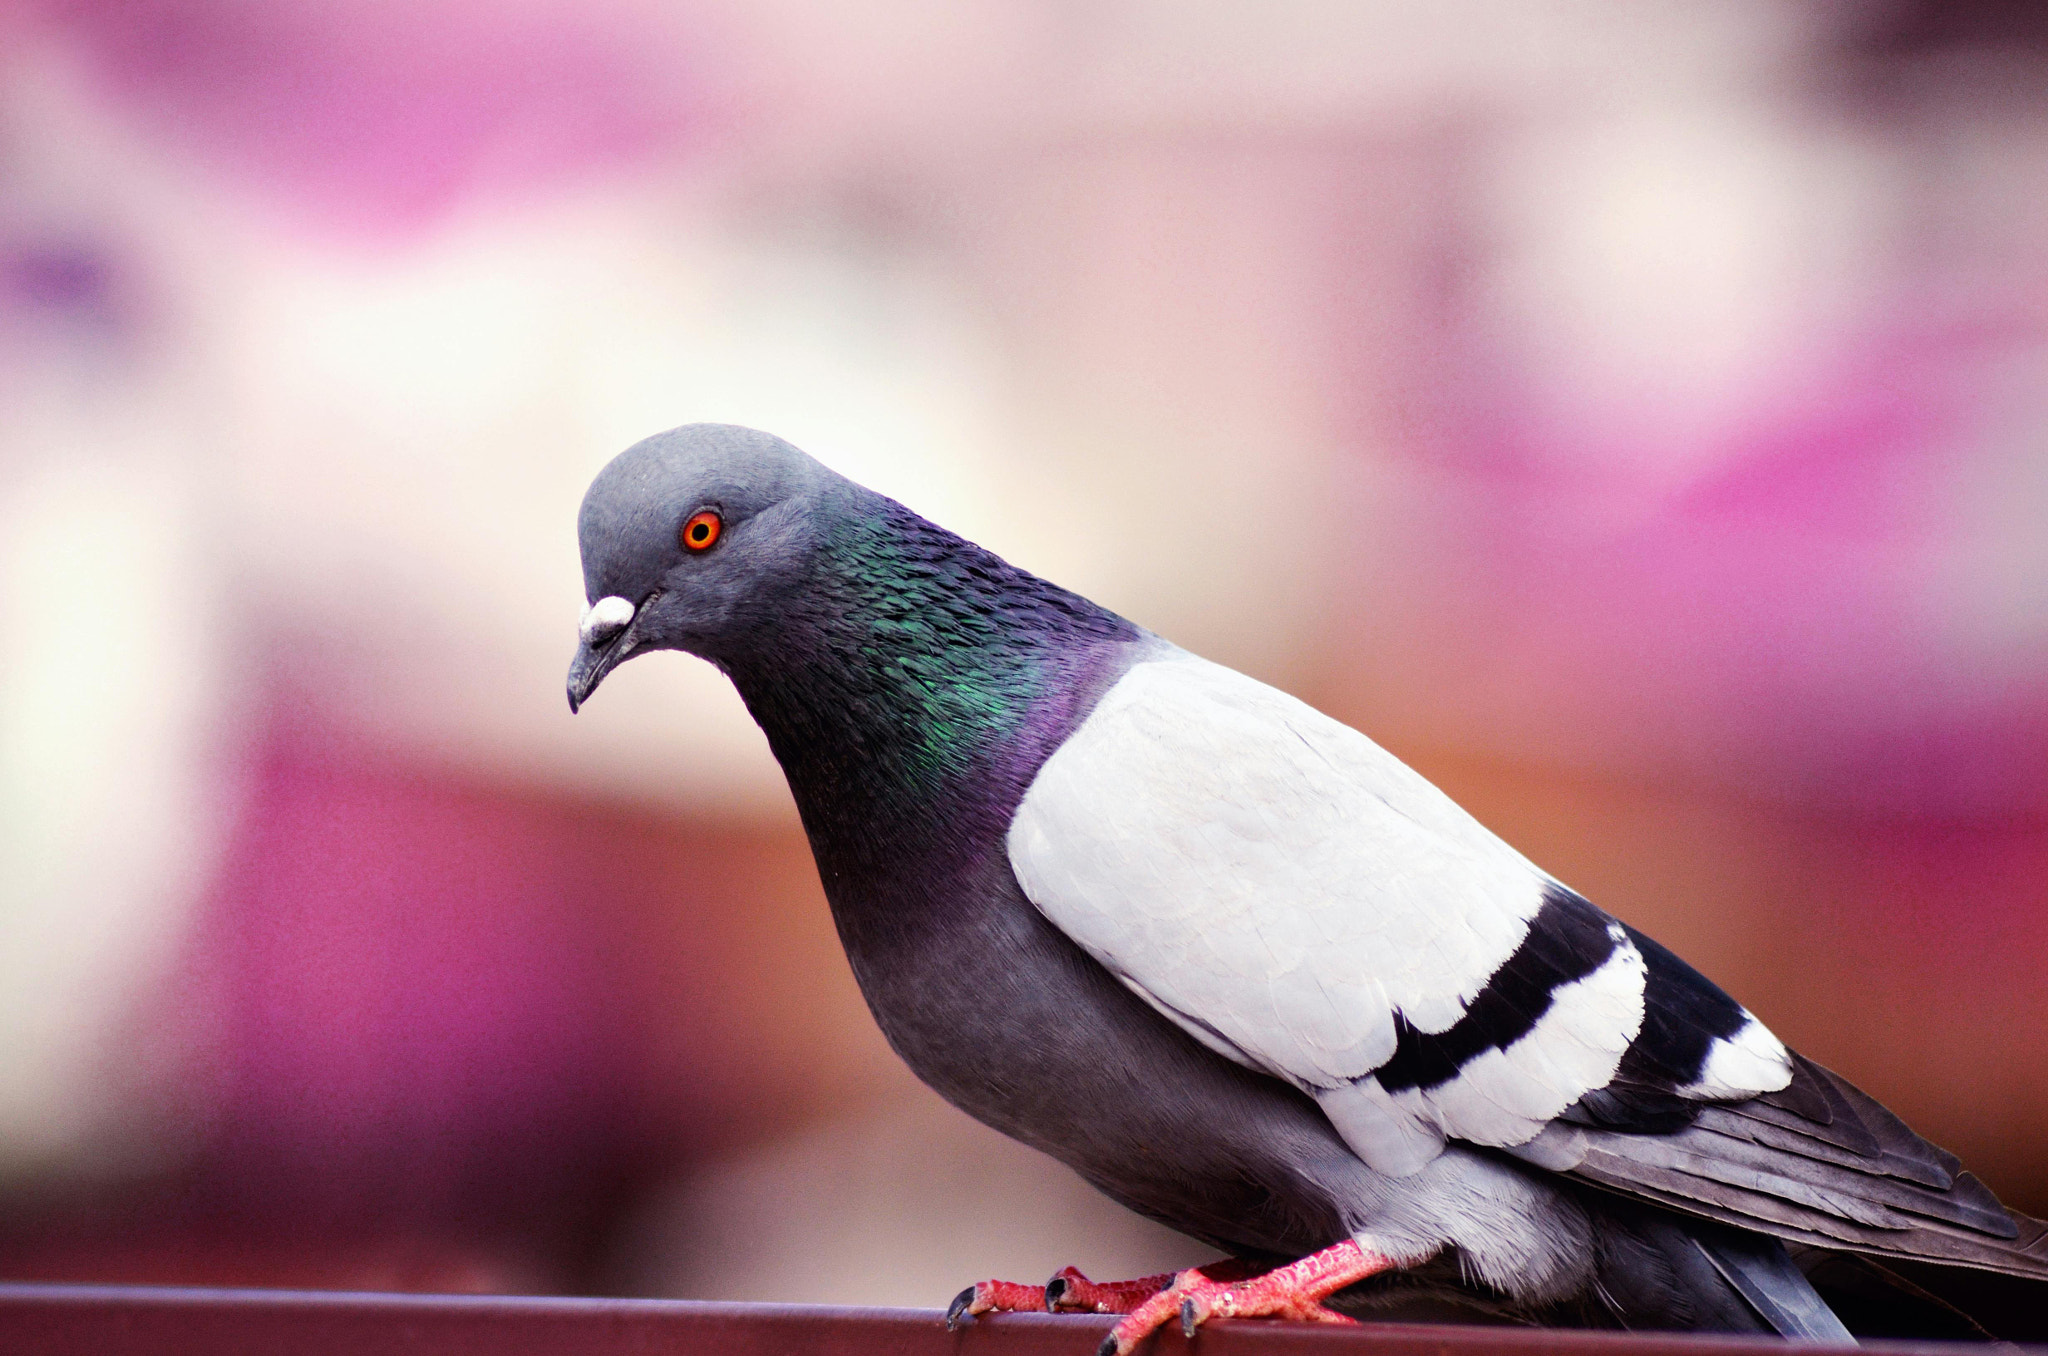 pigeons look proud when photographed